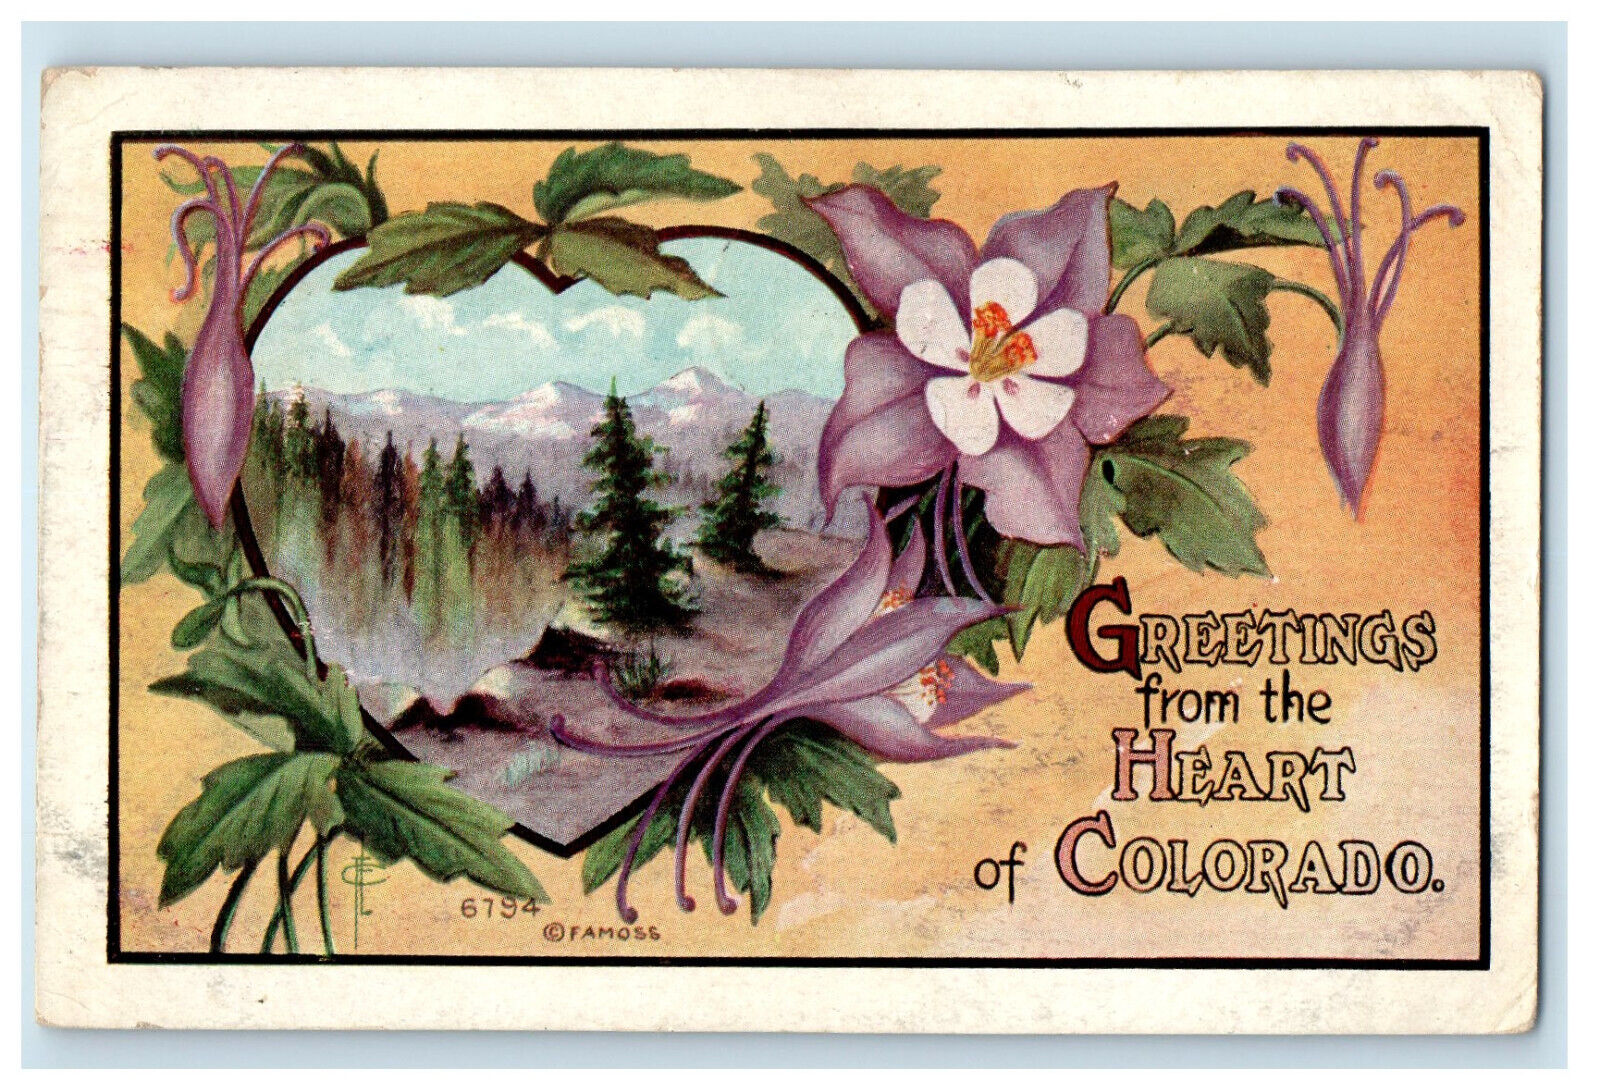 1912 Mountains, Flowers, Greetings from the Heart of Colorado CO Postcard